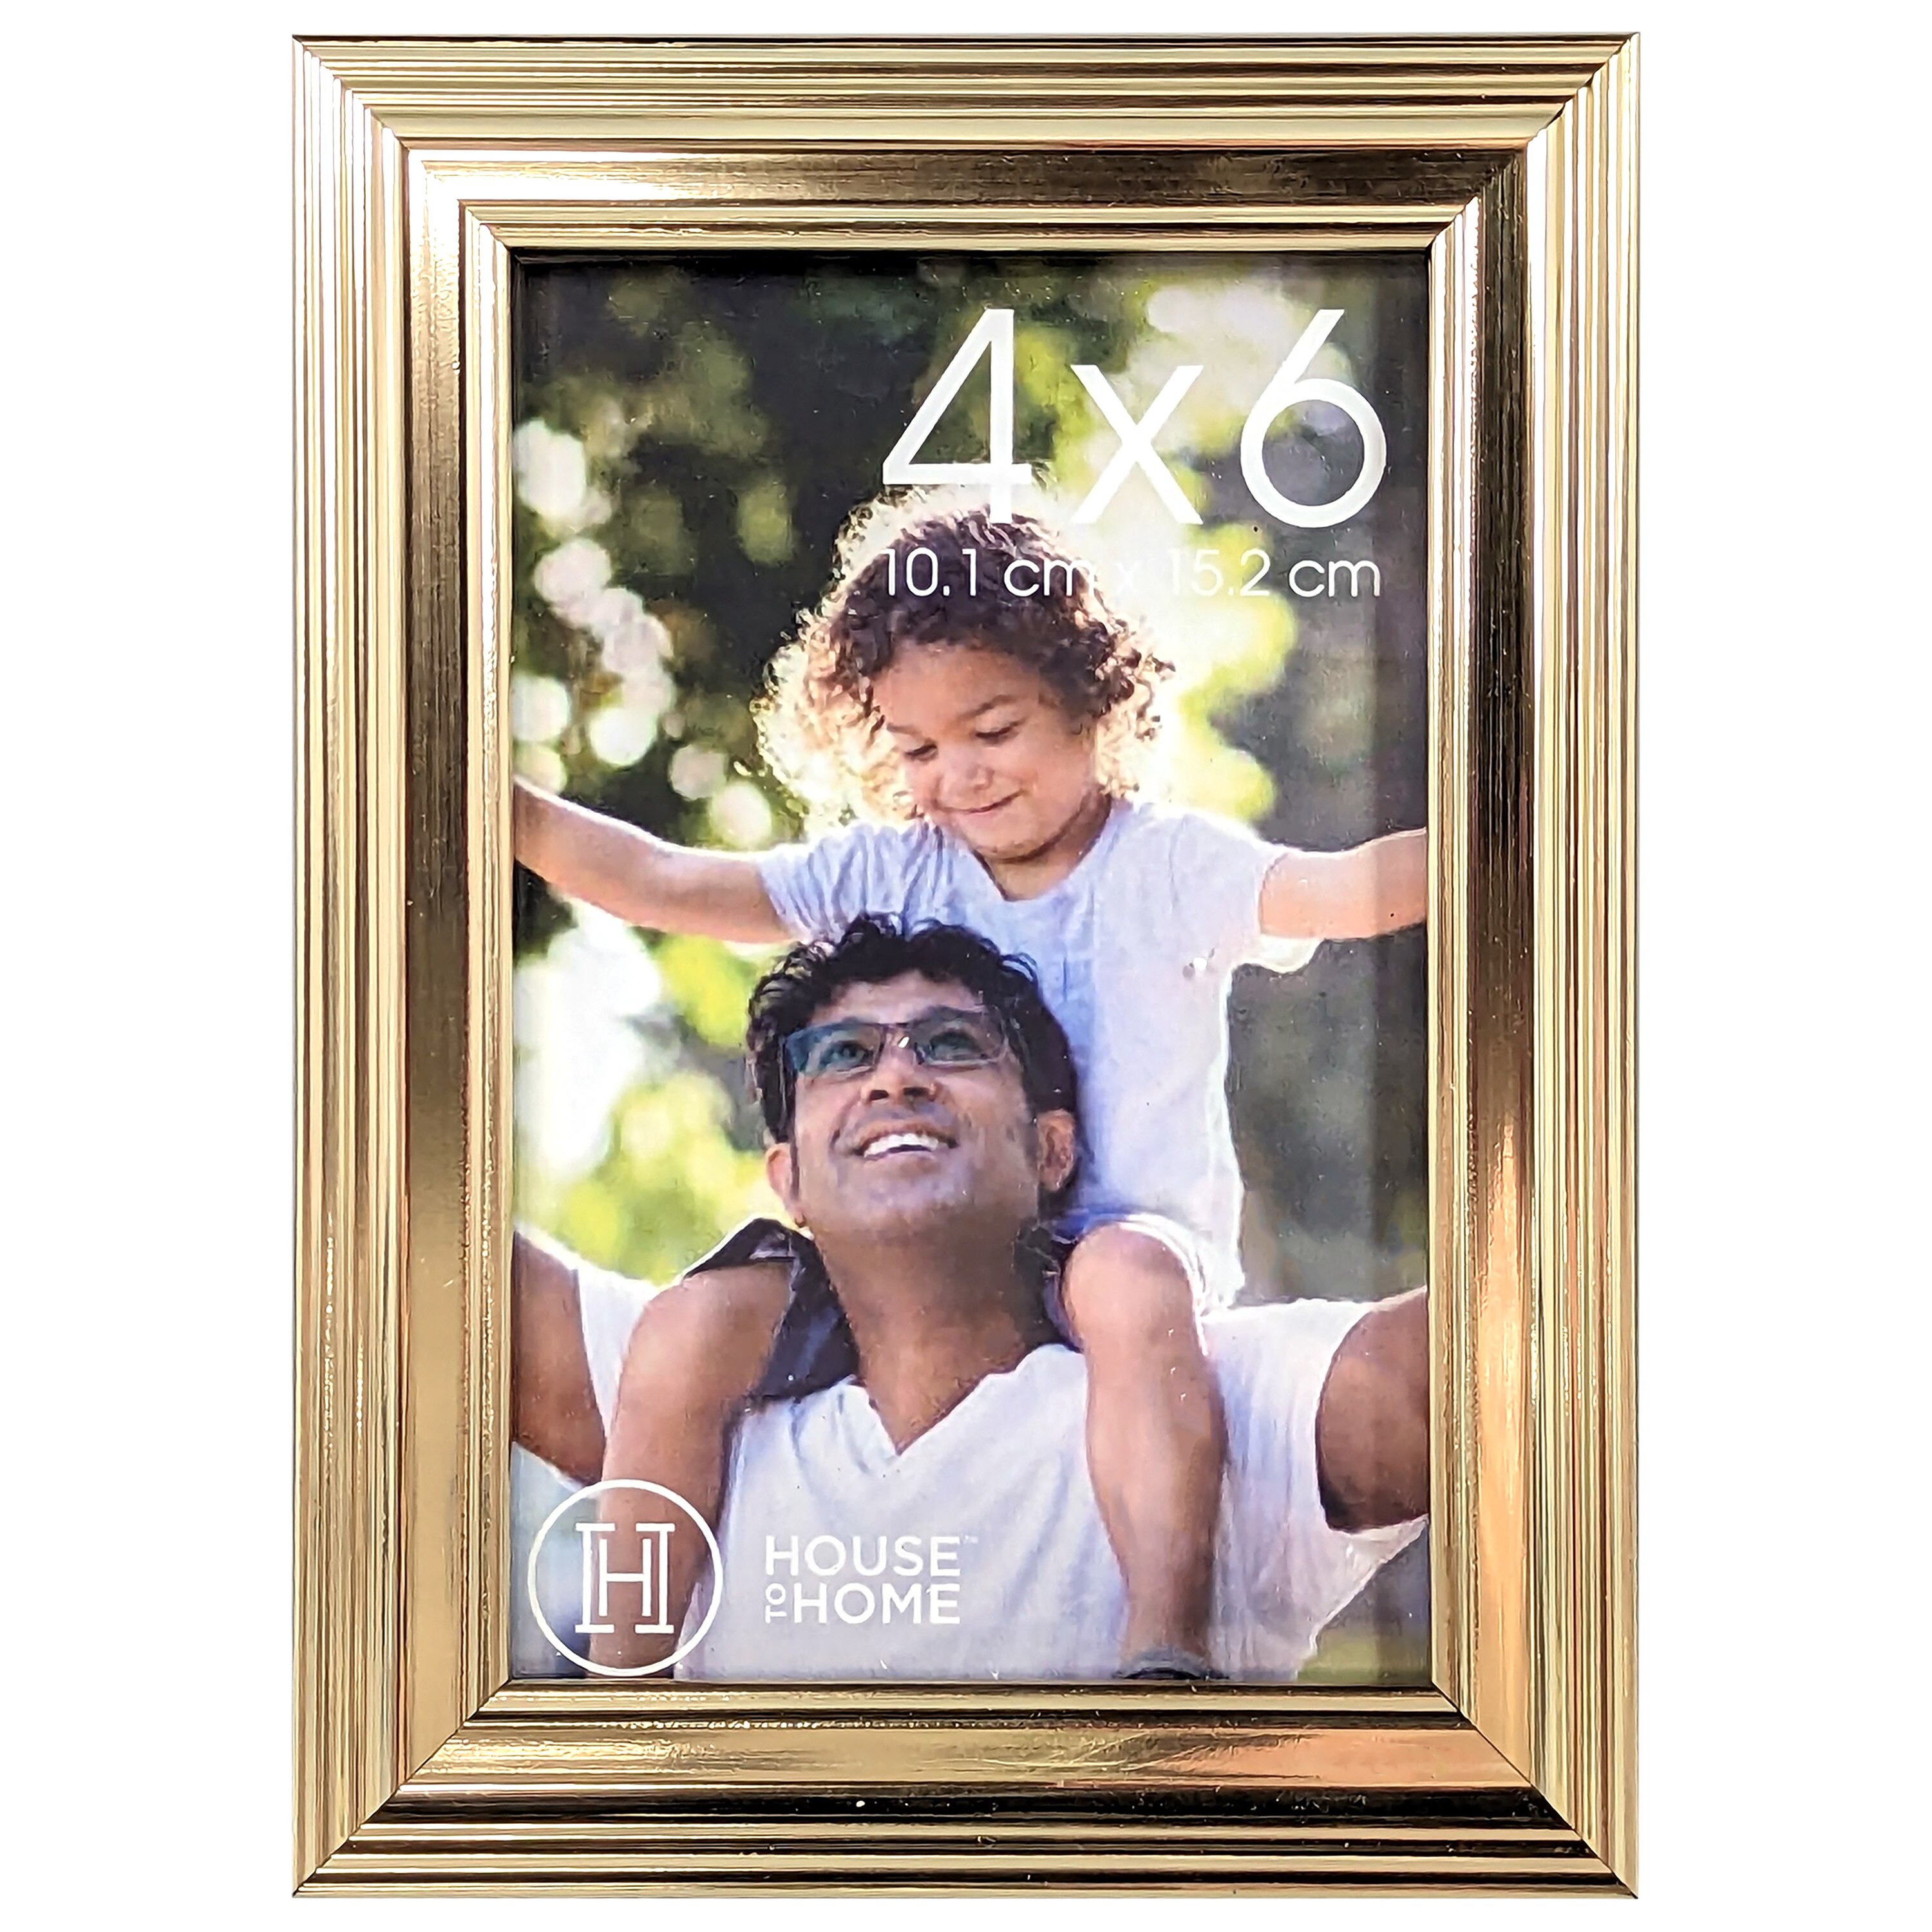 House to Home Champagne Picture Frame, 4x6